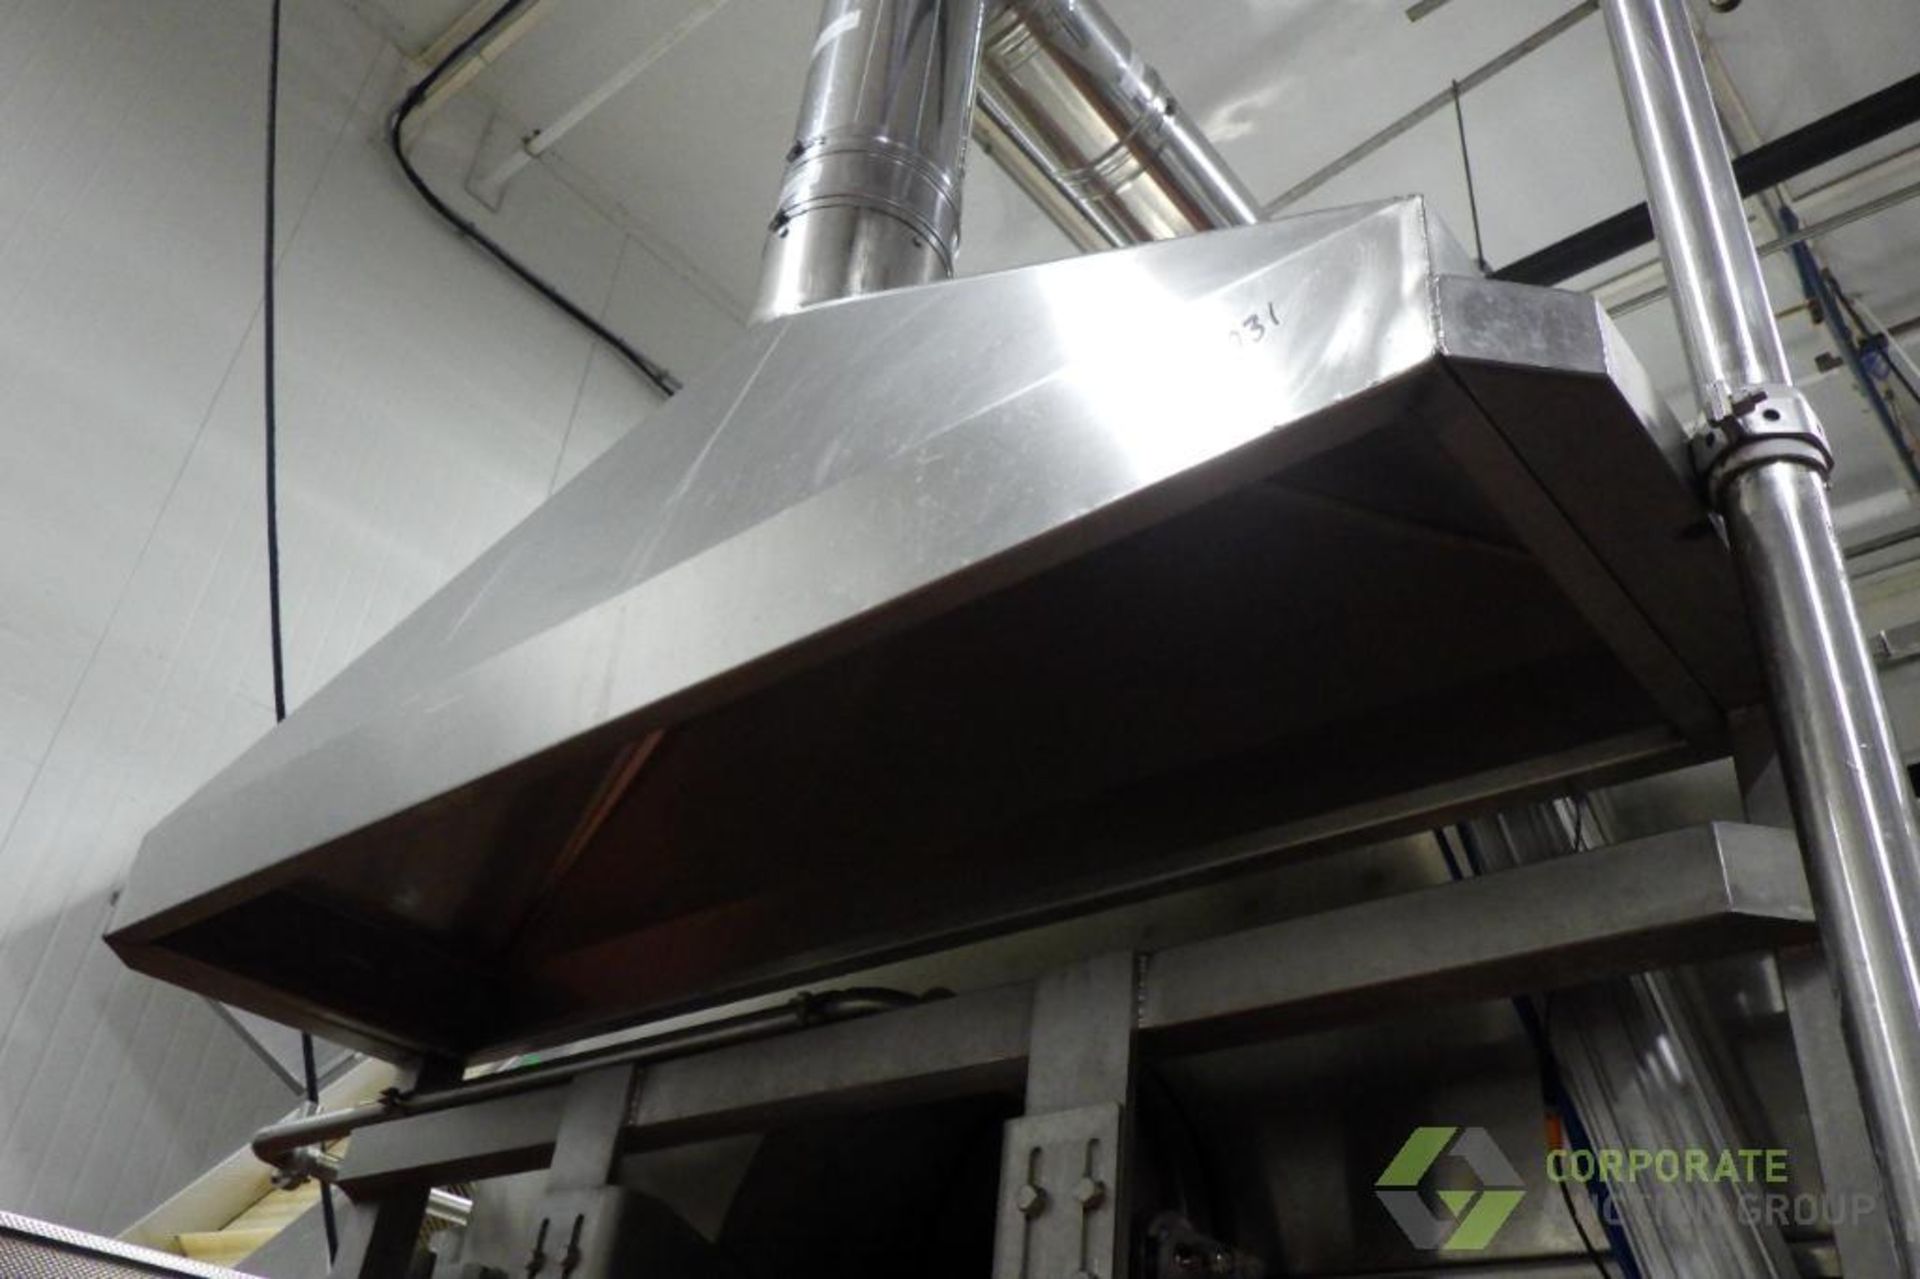 2022 Hellenic Food Machinery Drum Blancher w/ Exhaust Hood, Control Panel, 575V - Image 24 of 41